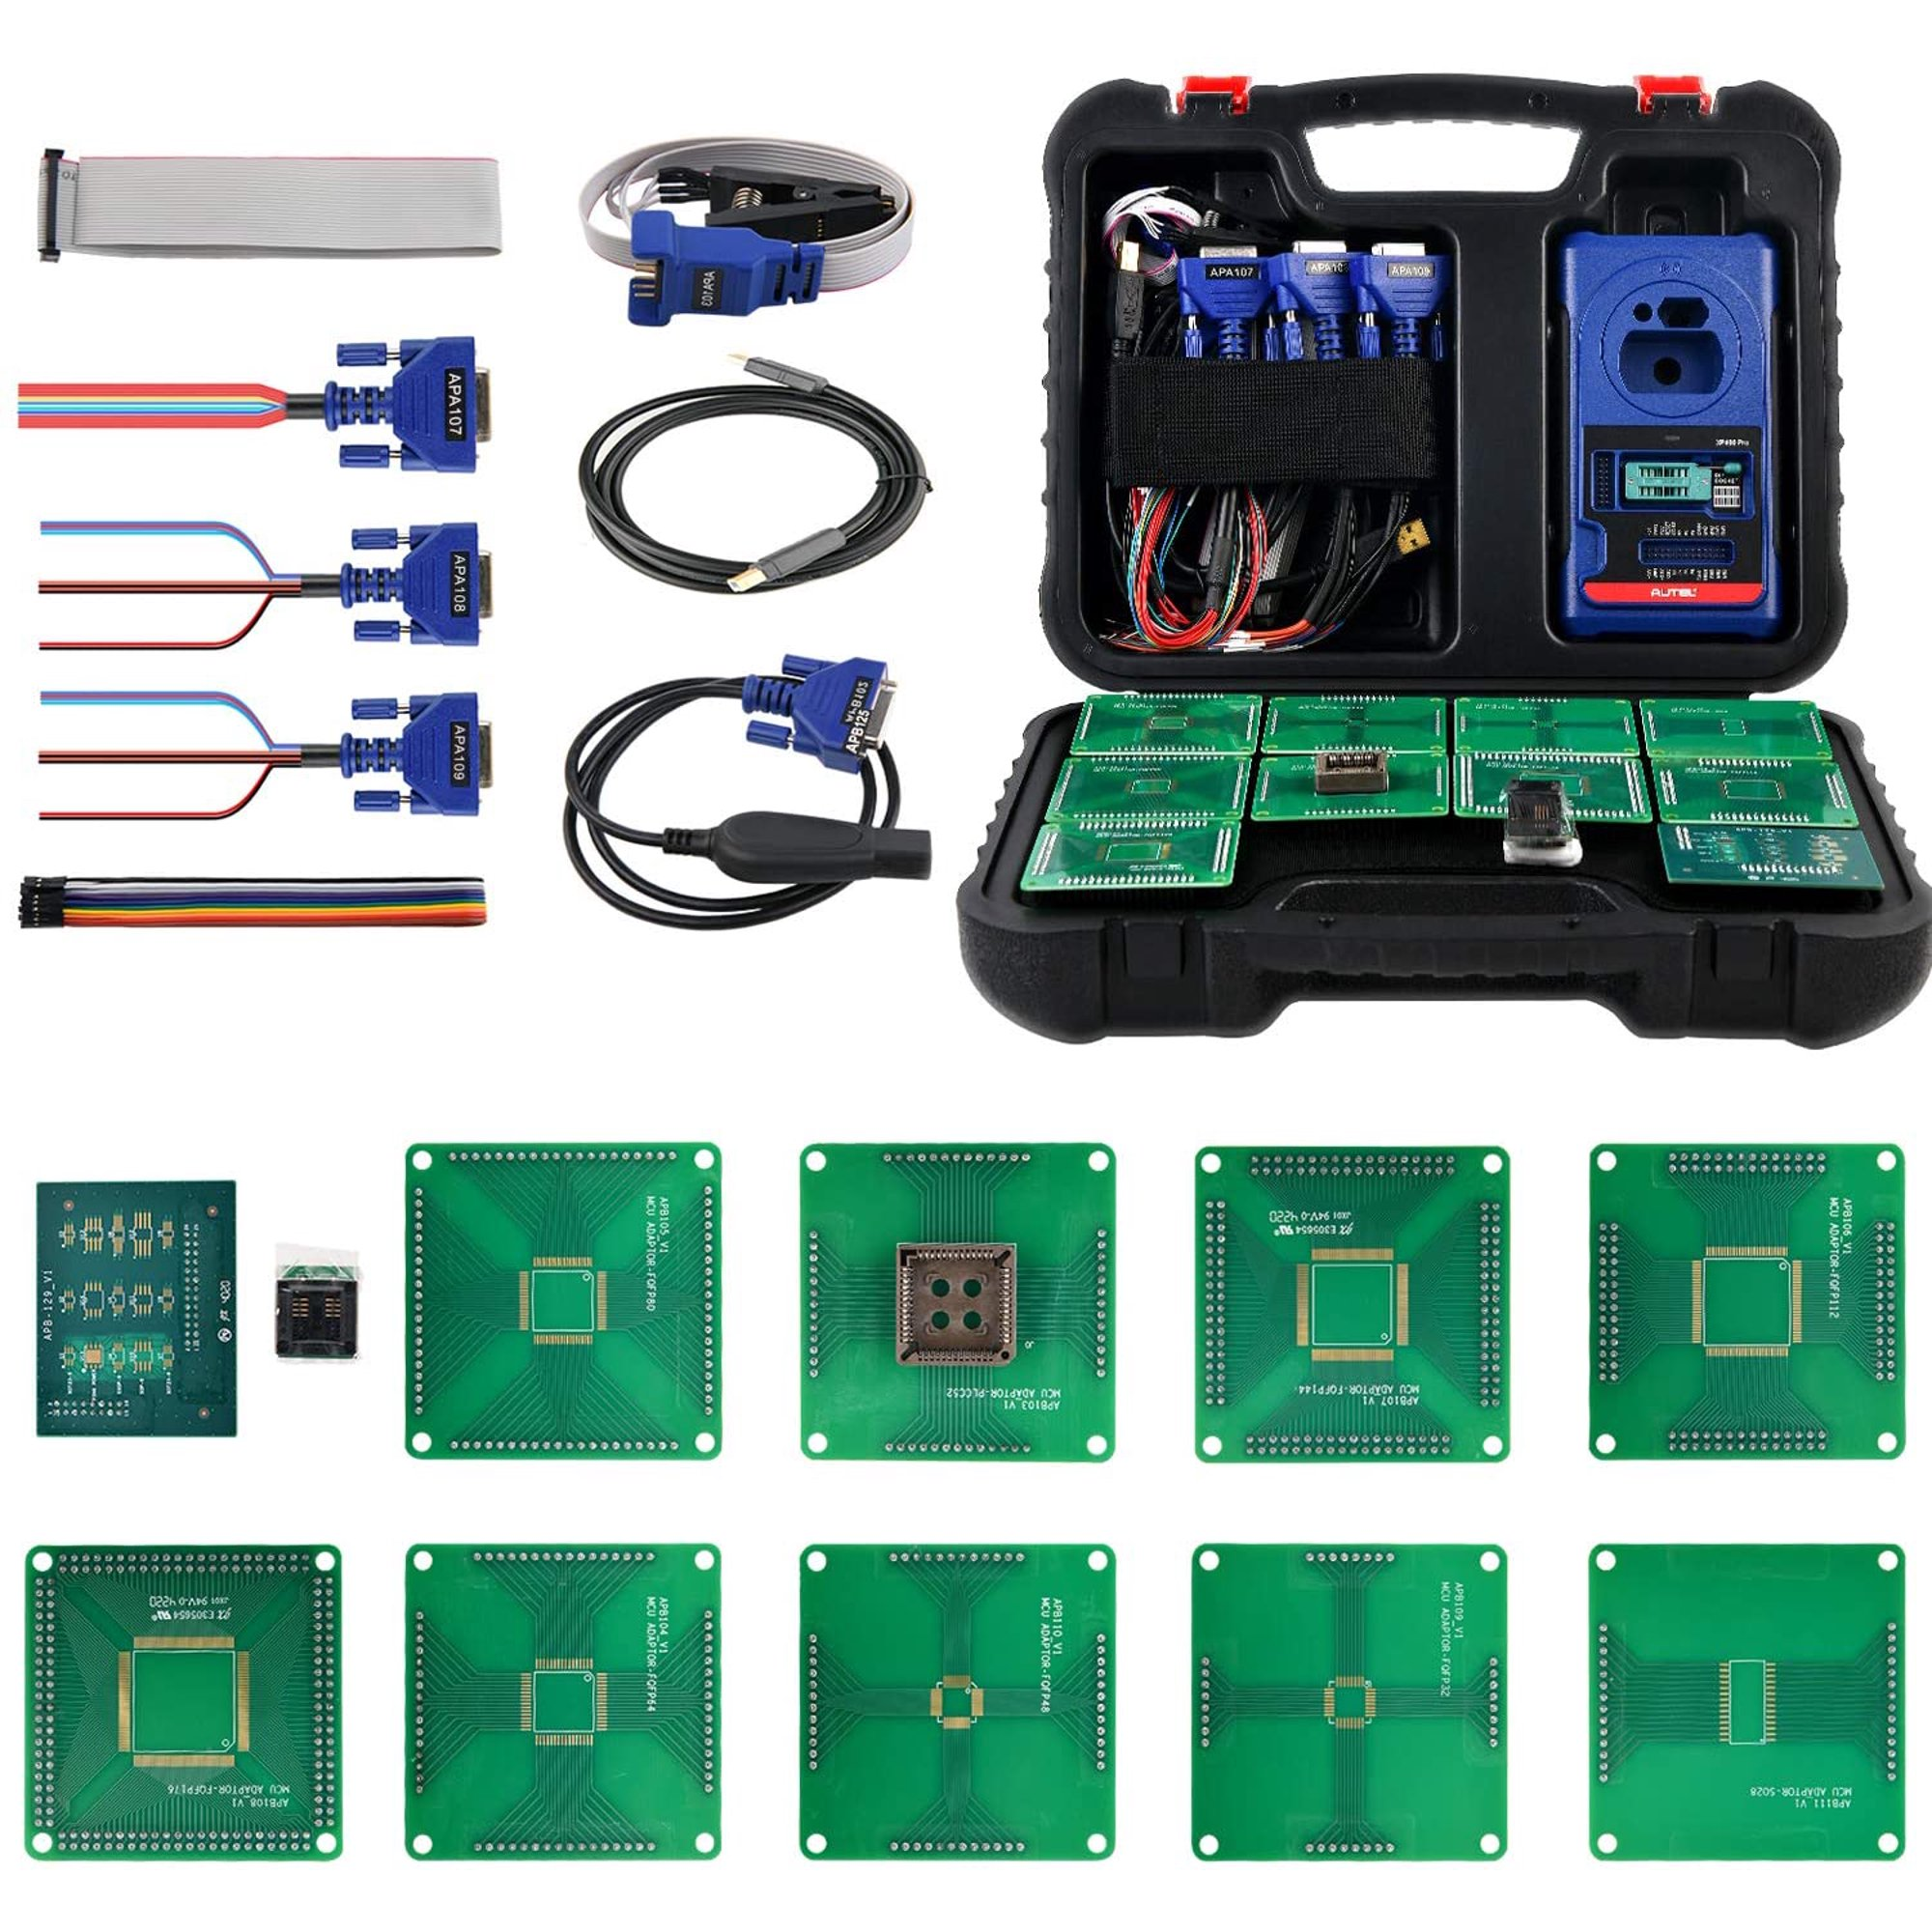 Autel XP400 Pro with IMKPA Adapters Key Programming Accessory Tool Kit Bundle, Compatible with IM608 and IM508 Diagnostic Tool